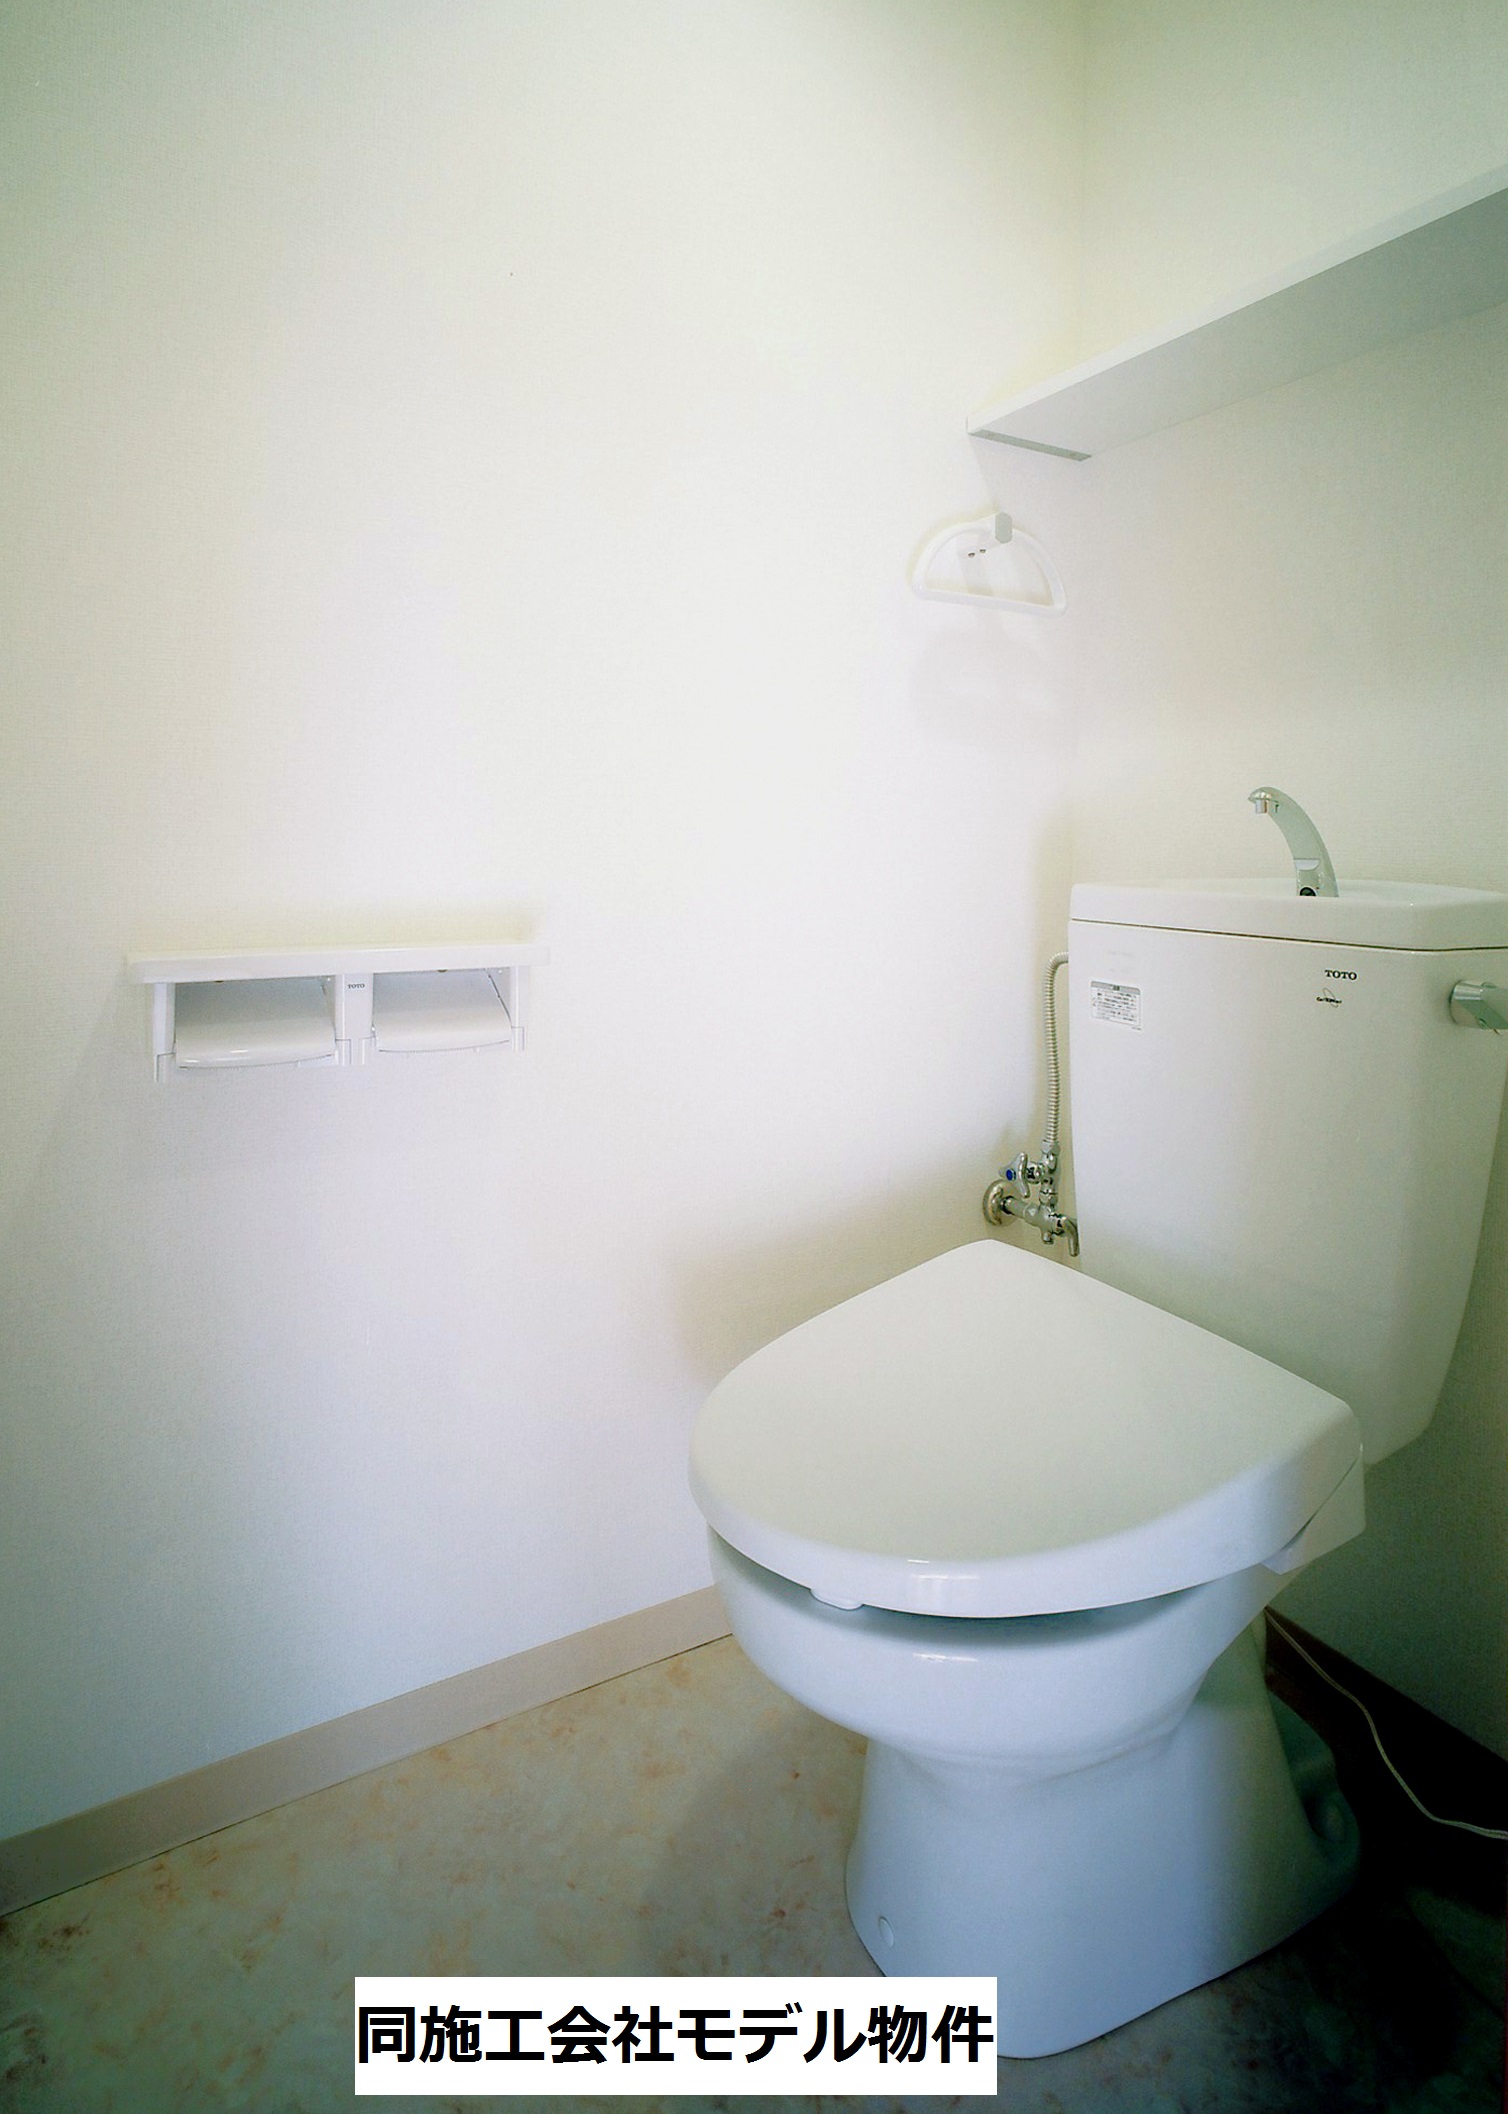 Toilet. It is a photograph of the same construction company model properties